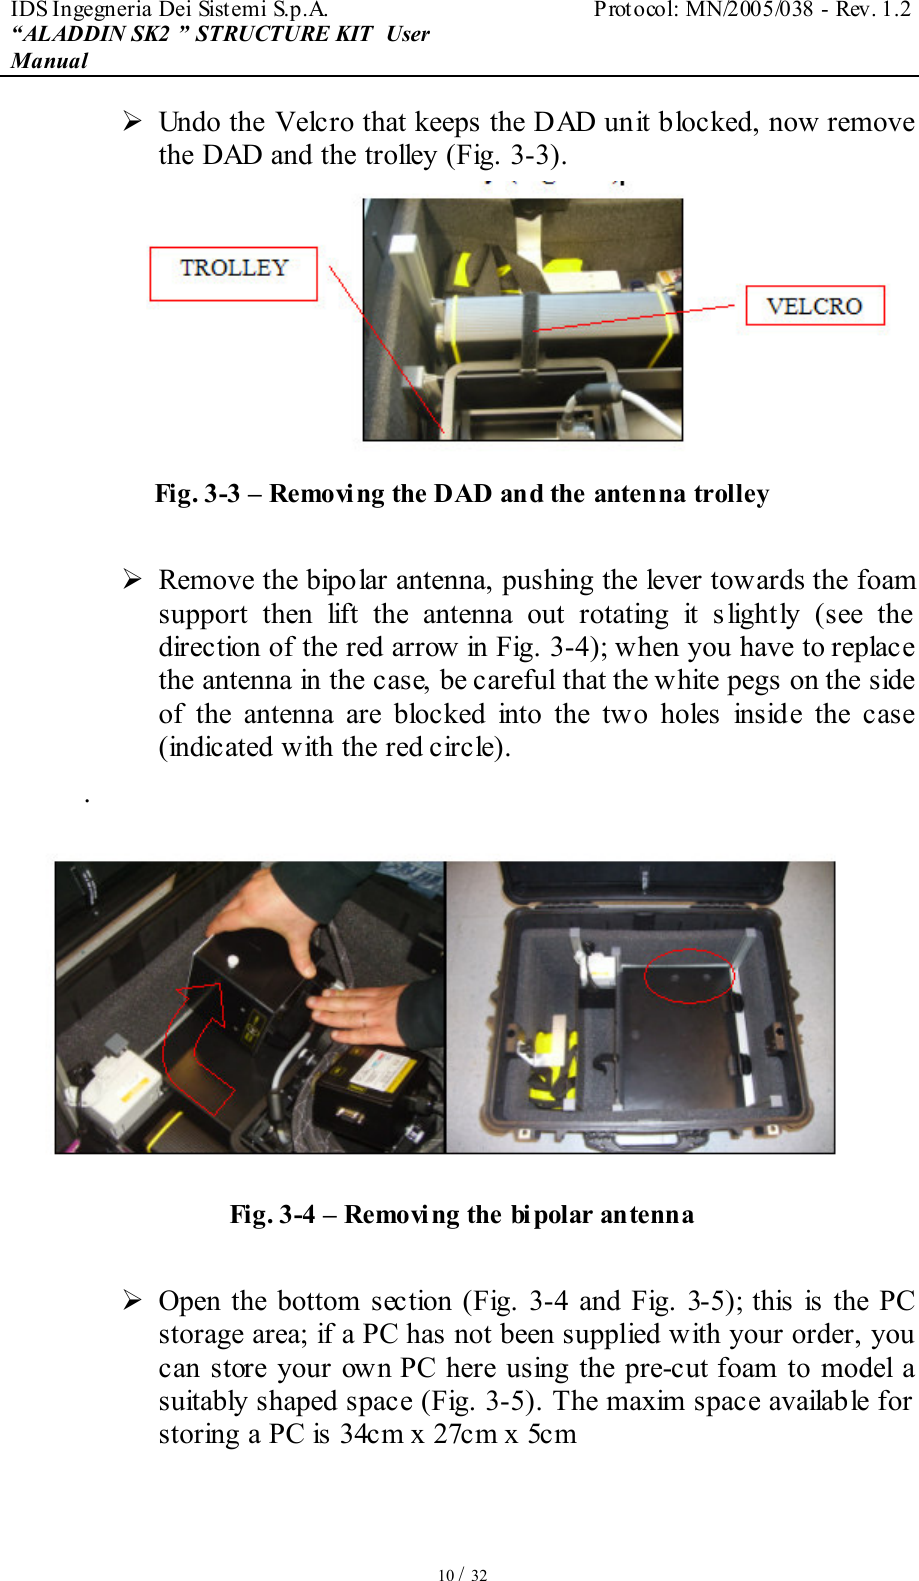 IDS Ingegneria Dei Sistemi S.p.A.  Protocol: MN/2005/038 - Rev. 1.2 “ALADDIN SK2 ” STRUCTURE KIT  User Manual   10 / 32  Undo the Velcro that keeps the DAD unit blocked, now remove the DAD and the trolley (Fig. 3-3).    Fig. 3-3 – Removing the DAD and the antenna trolley   Remove the bipolar antenna, pushing the lever towards the foam support  then  lift  the  antenna  out  rotating  it  s lightly  (see  the direction of the red arrow in Fig. 3-4); when you have to replace the antenna in the case, be careful that the white pegs on the side of  the  antenna  are  blocked  into  the  two  holes  inside  the  case (indicated with the red circle). .  Fig. 3-4 – Removing the bi polar antenna   Open  the bottom section  (Fig.  3-4  and Fig. 3-5); this  is the PC storage area; if a PC has not been supplied with your order, you can  store your  own  PC  here using  the pre-cut foam to  model  a suitably shaped space (Fig. 3-5). The maxim space available for storing a PC is 34cm x 27cm x 5cm  